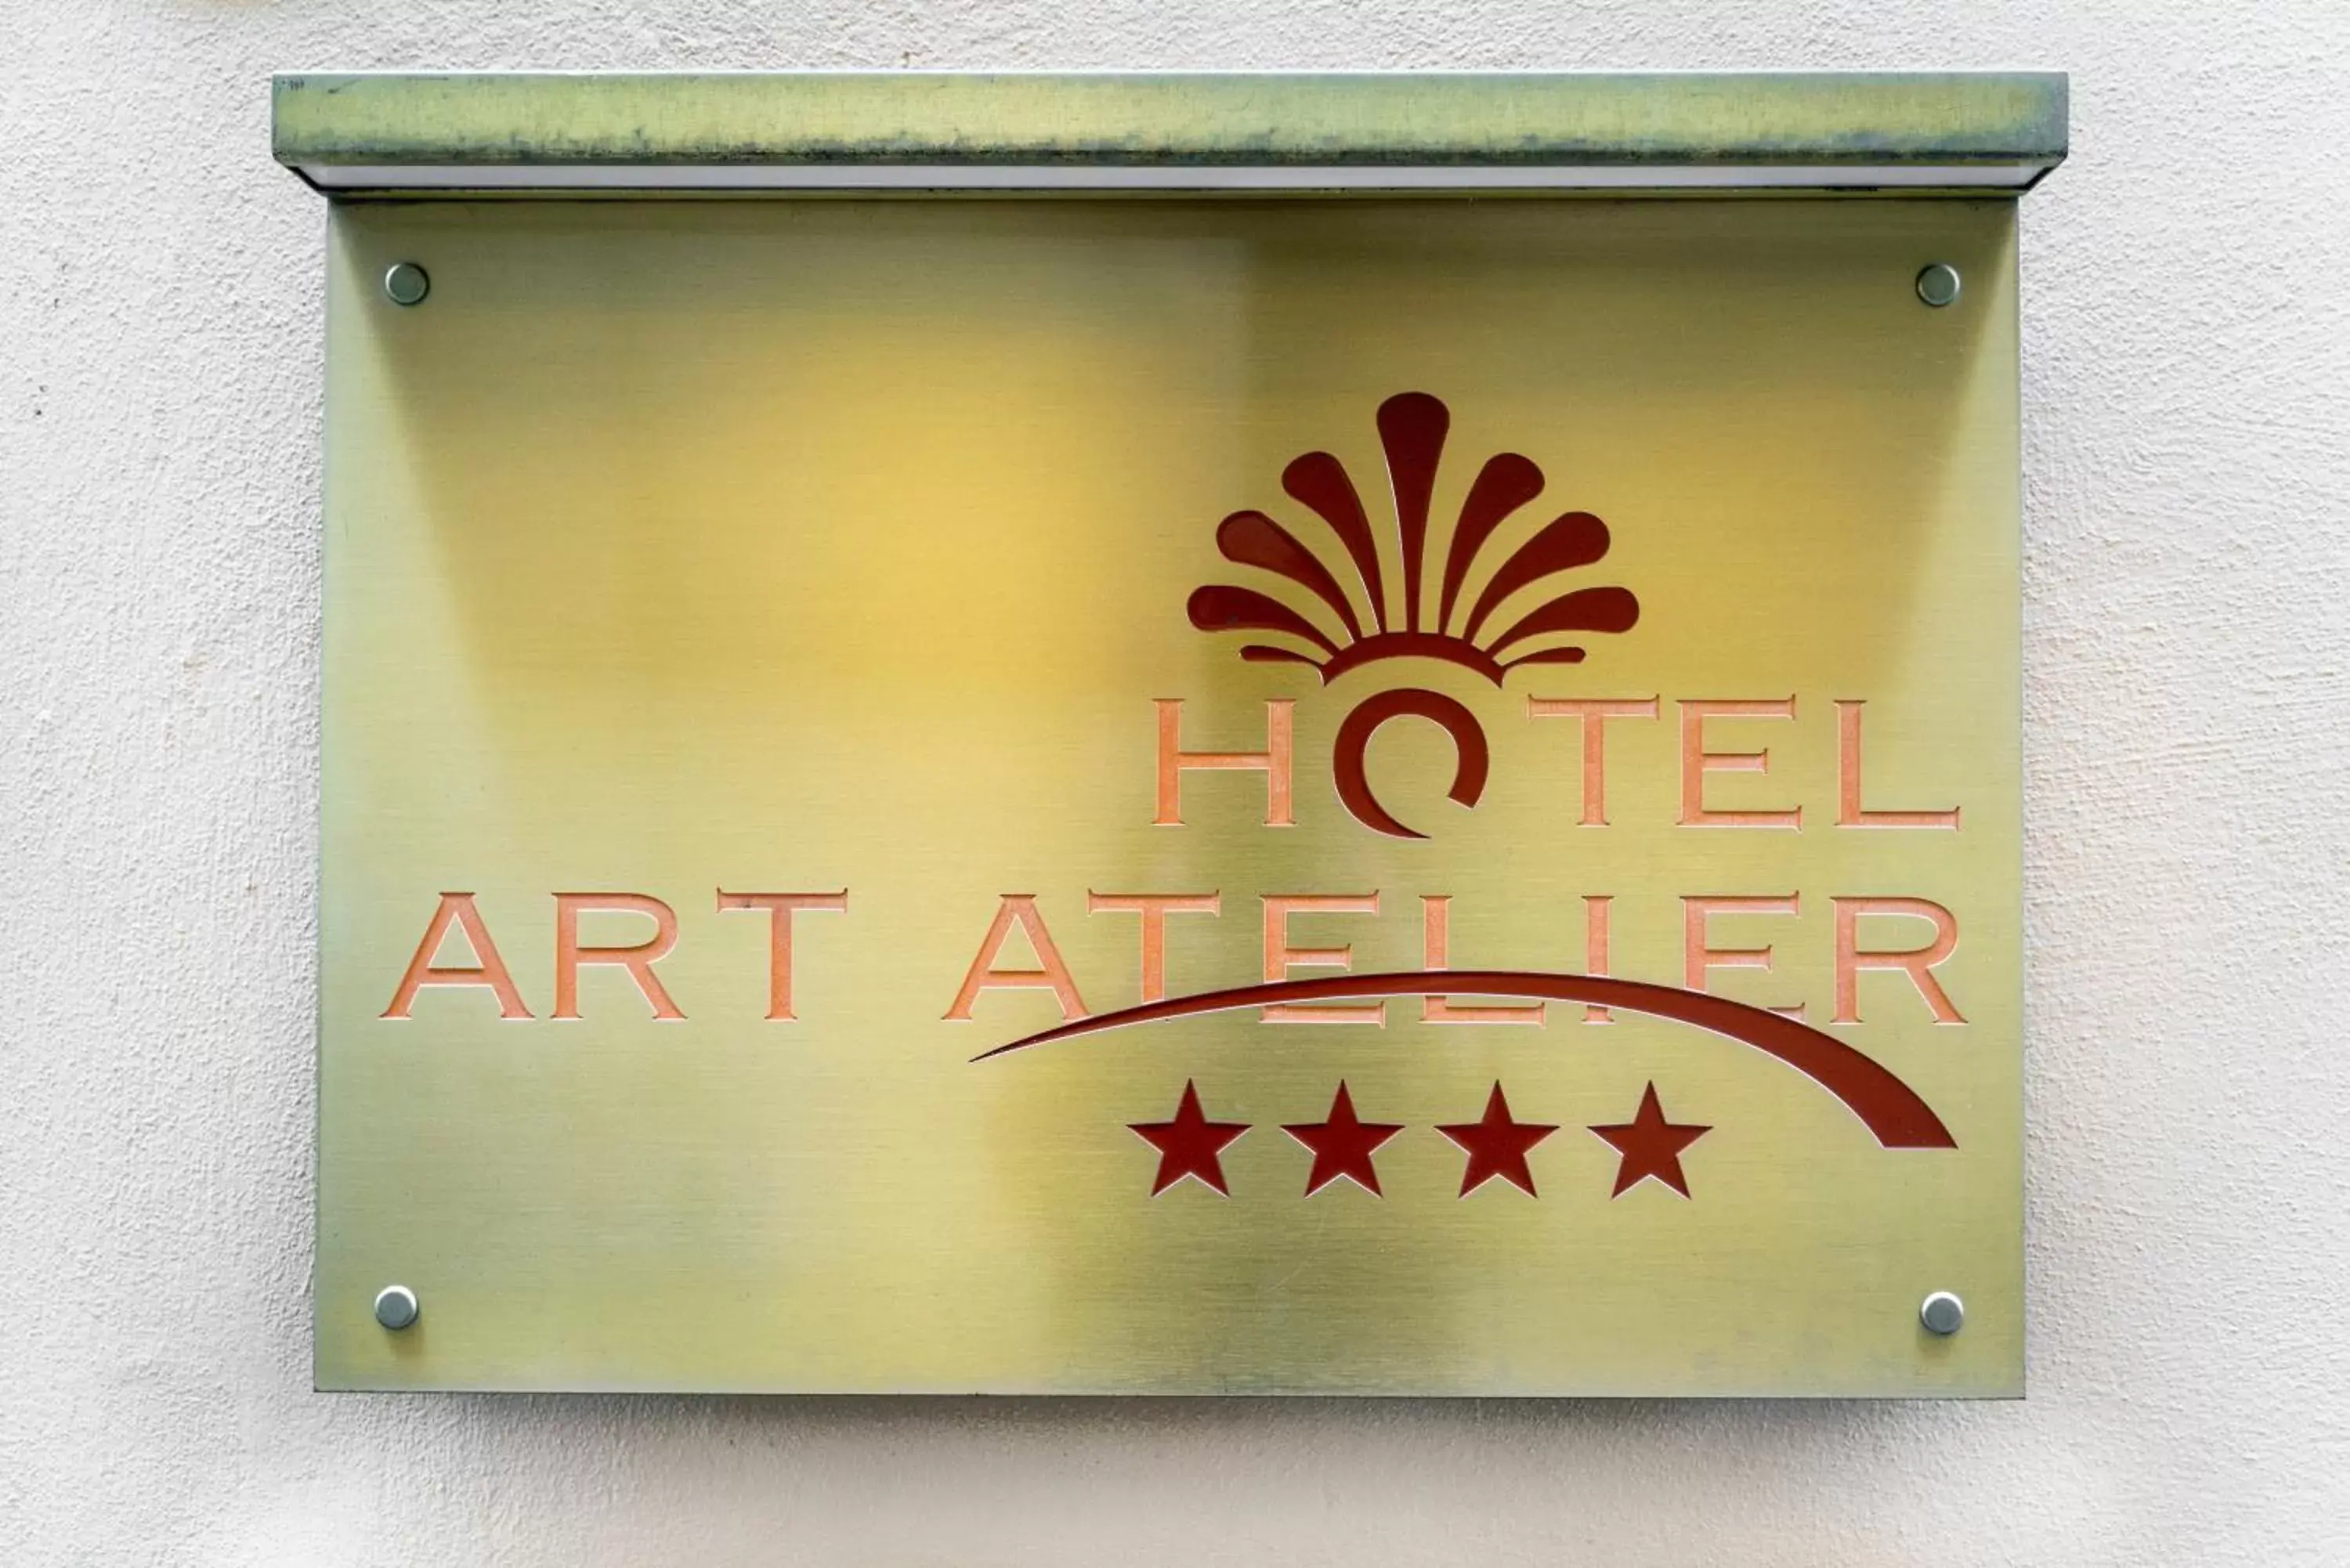 Property building, Property Logo/Sign in Hotel Art Atelier